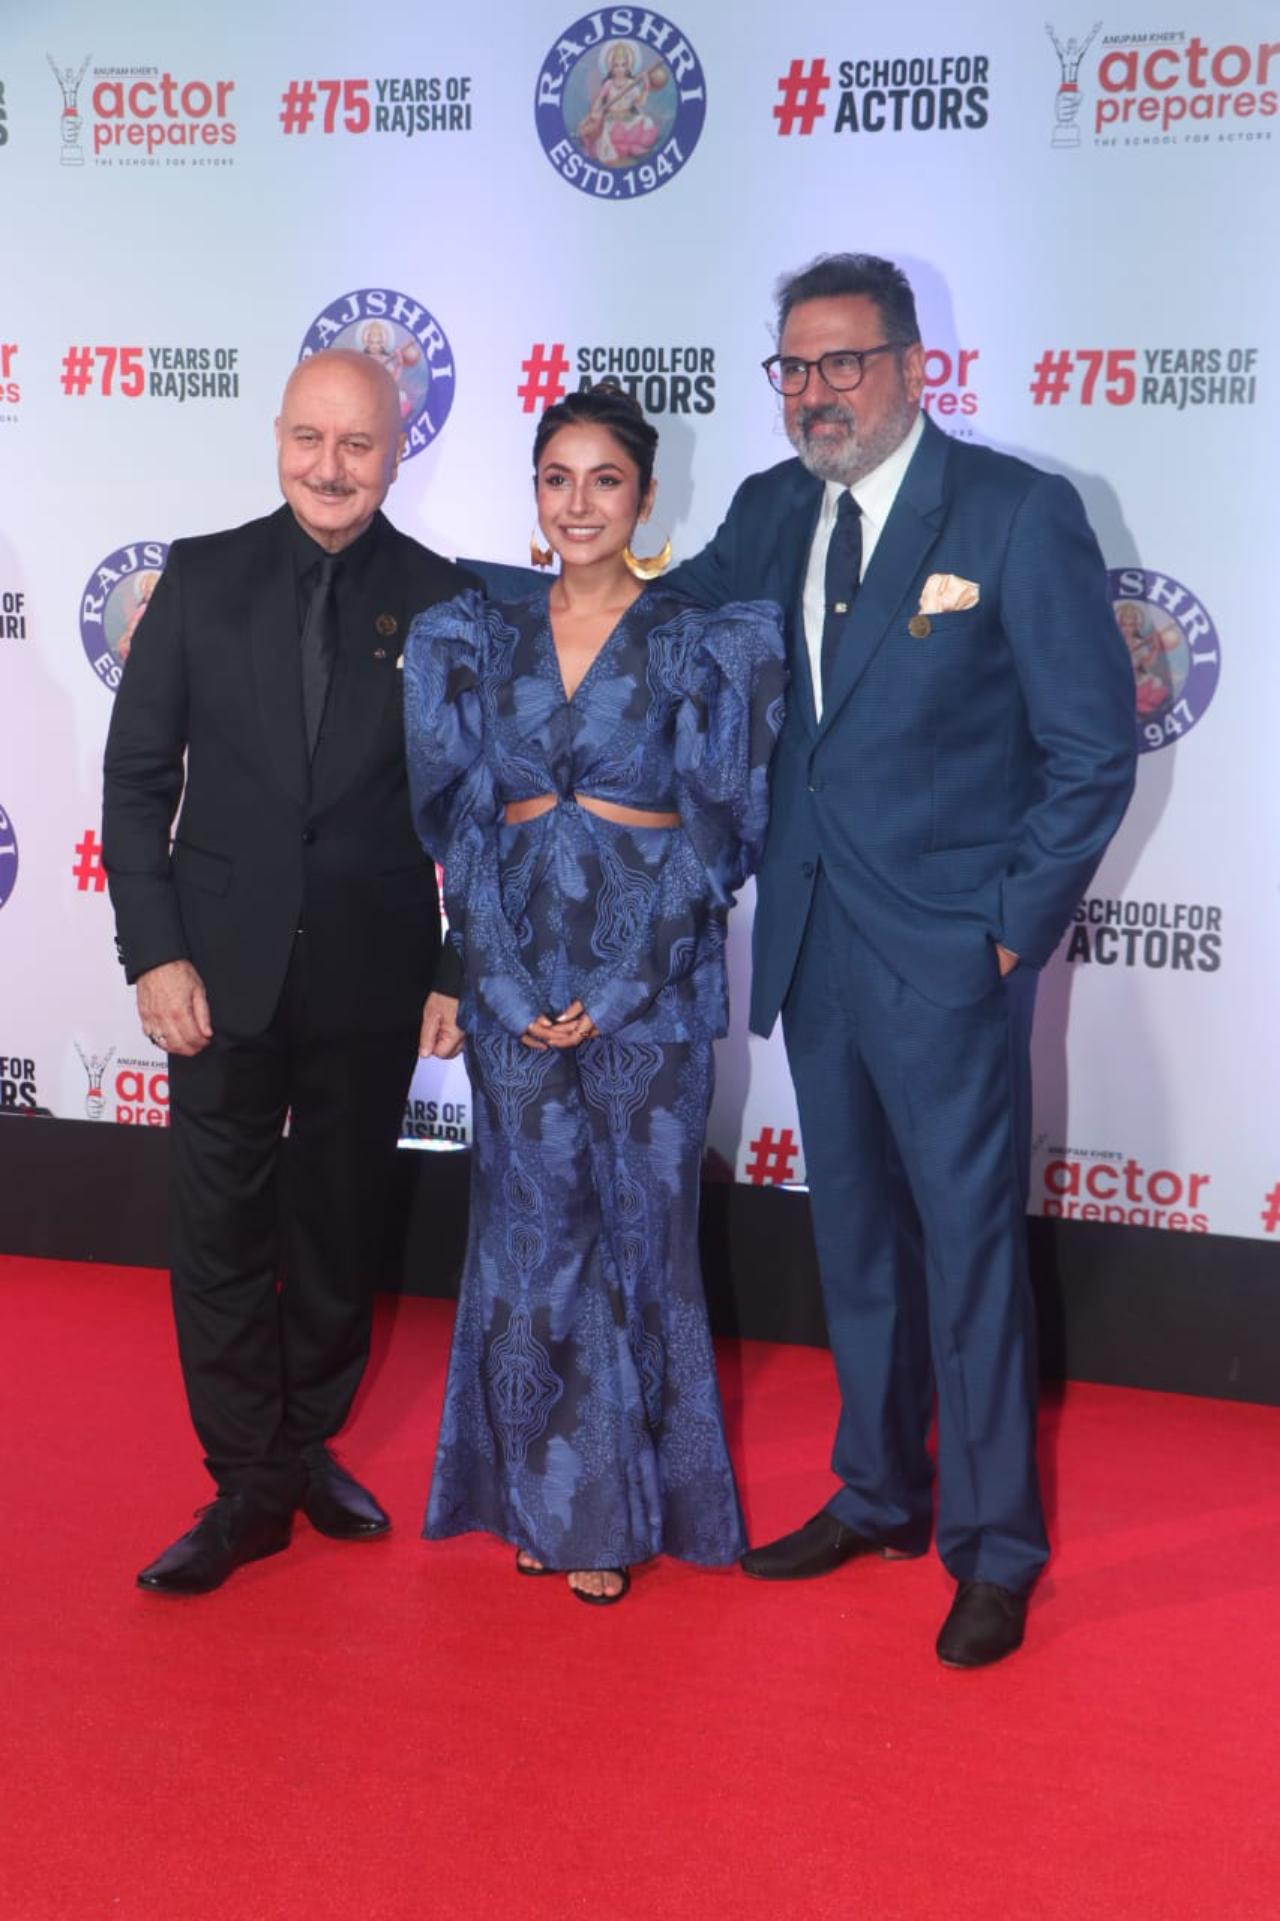 Shehnaaz Gill looked stunning in a blue flared-sleeve top paired with matching pants. She posed alongside Anupam Kher and Boman Irani on the red carpet